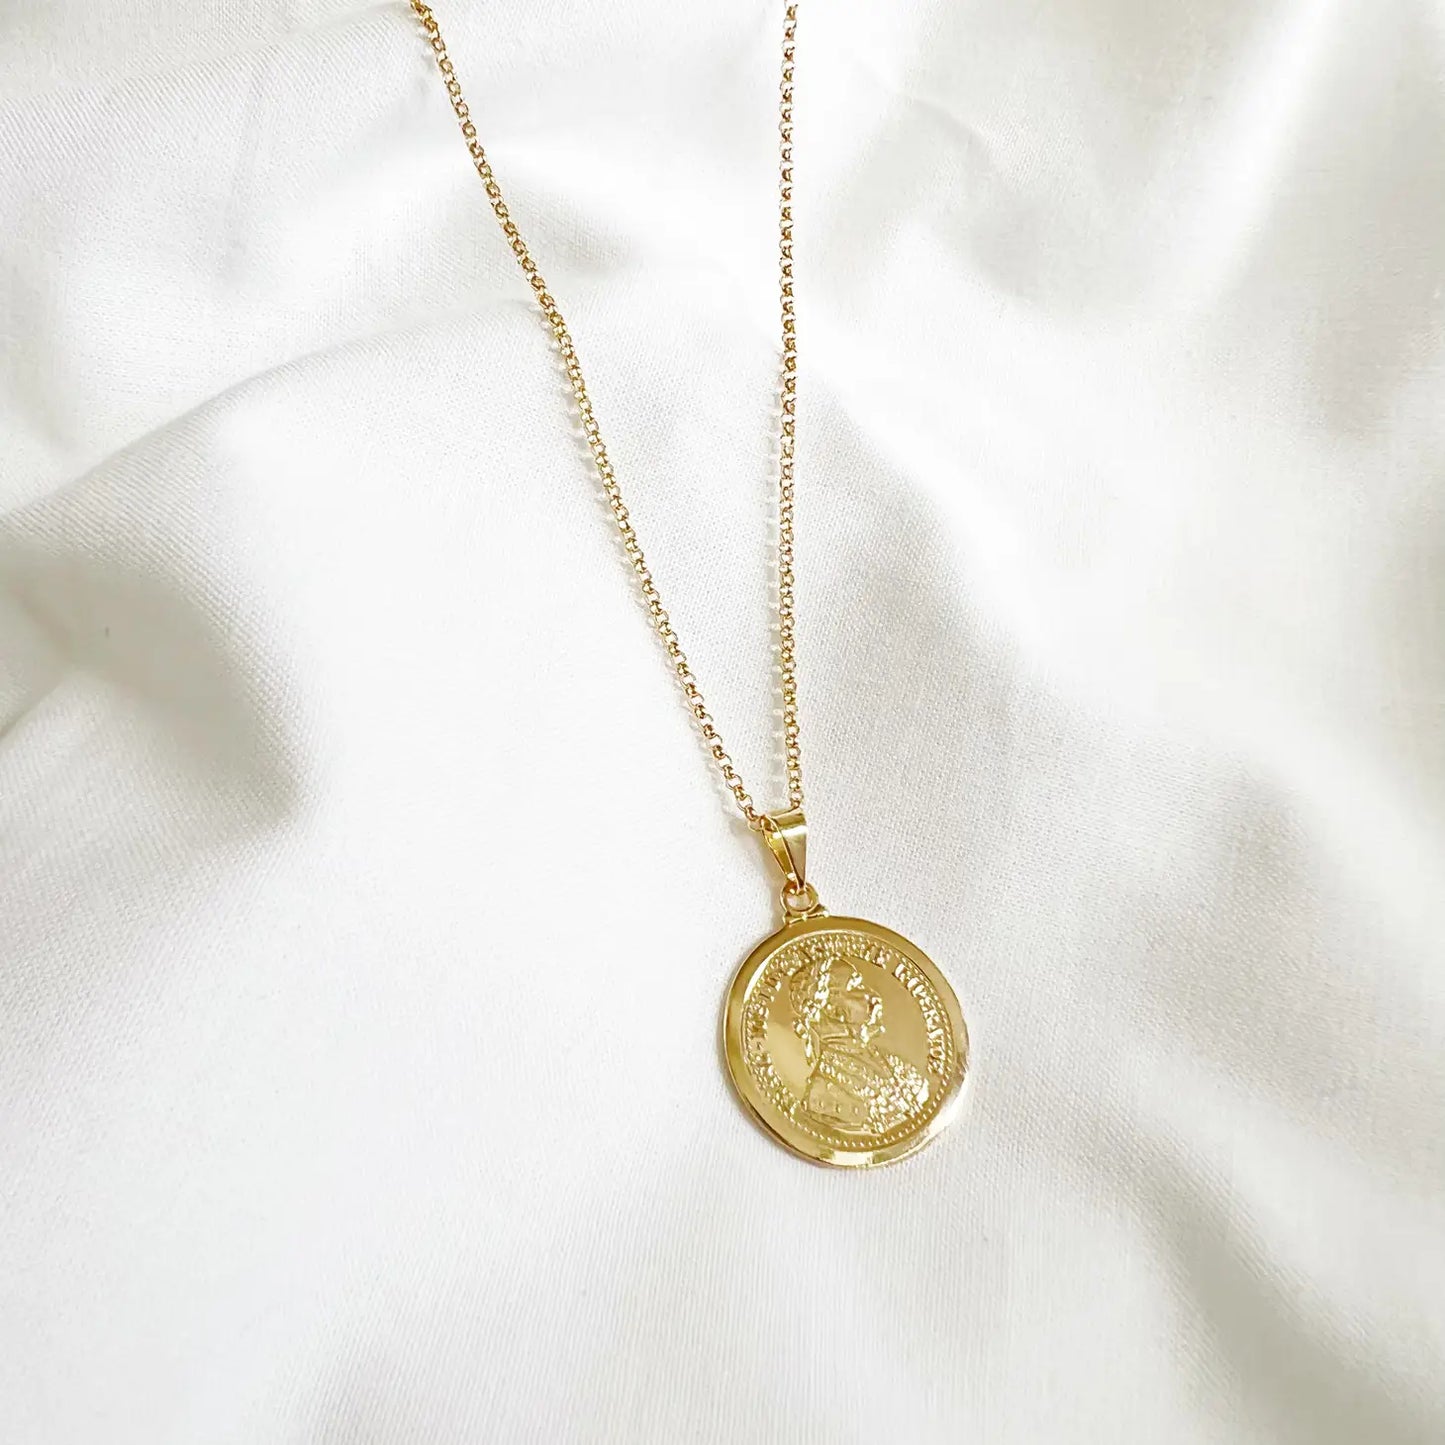 Relic Coin Chain Necklace Gold Filled